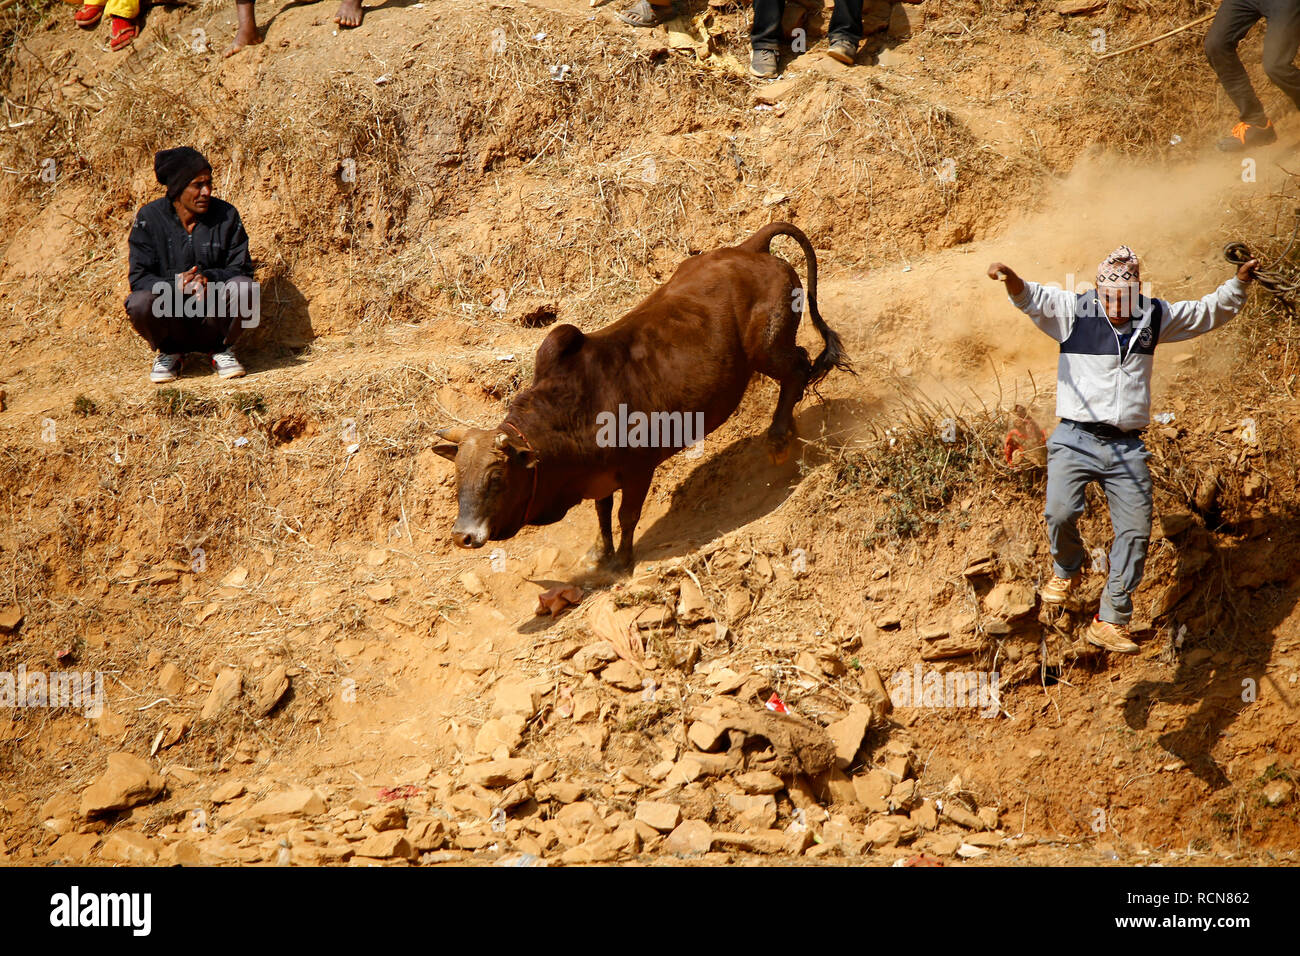 A man and his bull seen entering the ground for the bull fight during the festival organized  to mark  Maghe Sangranti or Makar Sankranti festival. Thousands of people gathered at an open ground of Taruka village at Nuwakot district to witness a bull fighting festival that heralds the end of winter, according to the Hindu calendar. Stock Photo